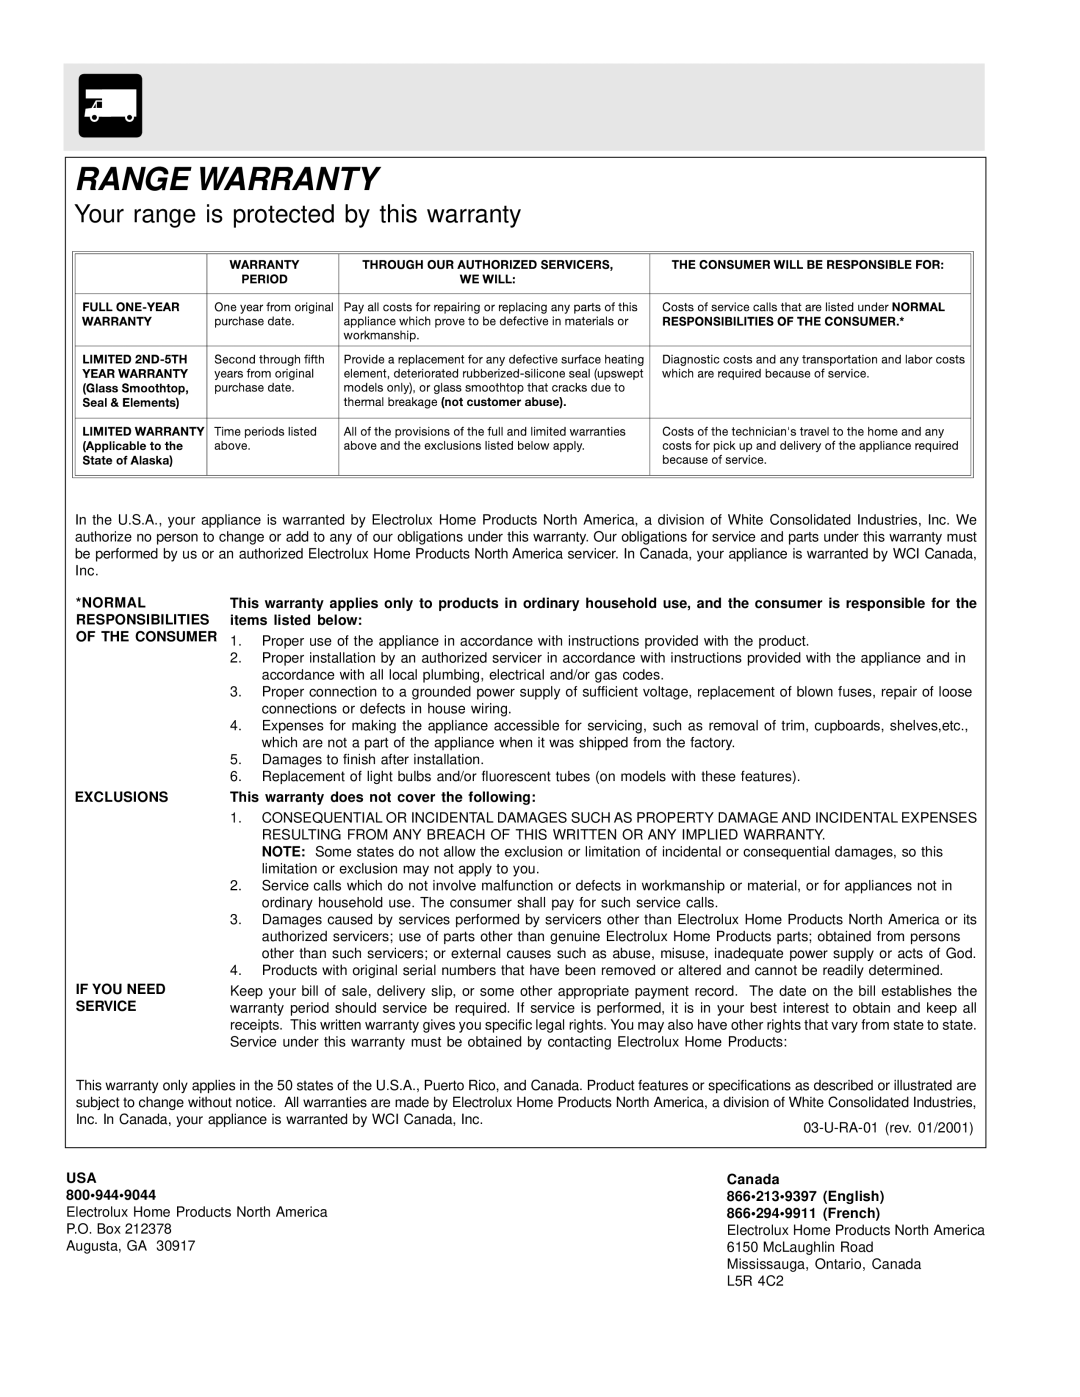 Frigidaire ES40, 316257124 manual Range Warranty, Your range is protected by this warranty, Service 